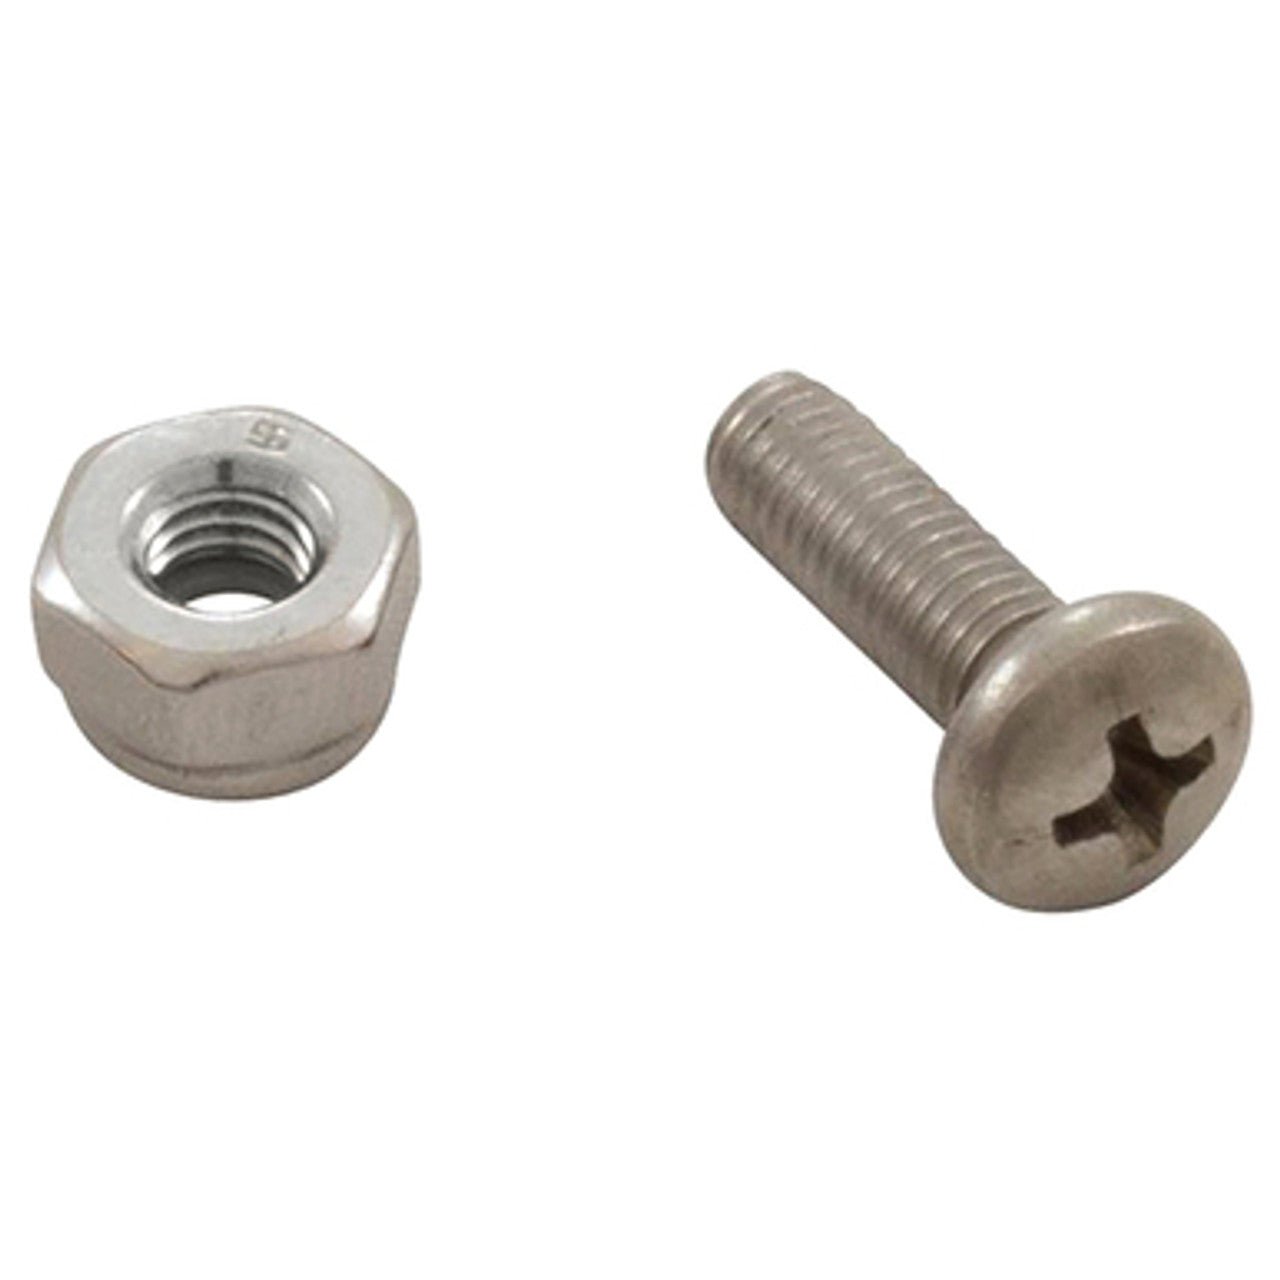 Pentair Nut & Bolt for Feedmast to Vac Tube EU79 - Cleaner Parts - img-1